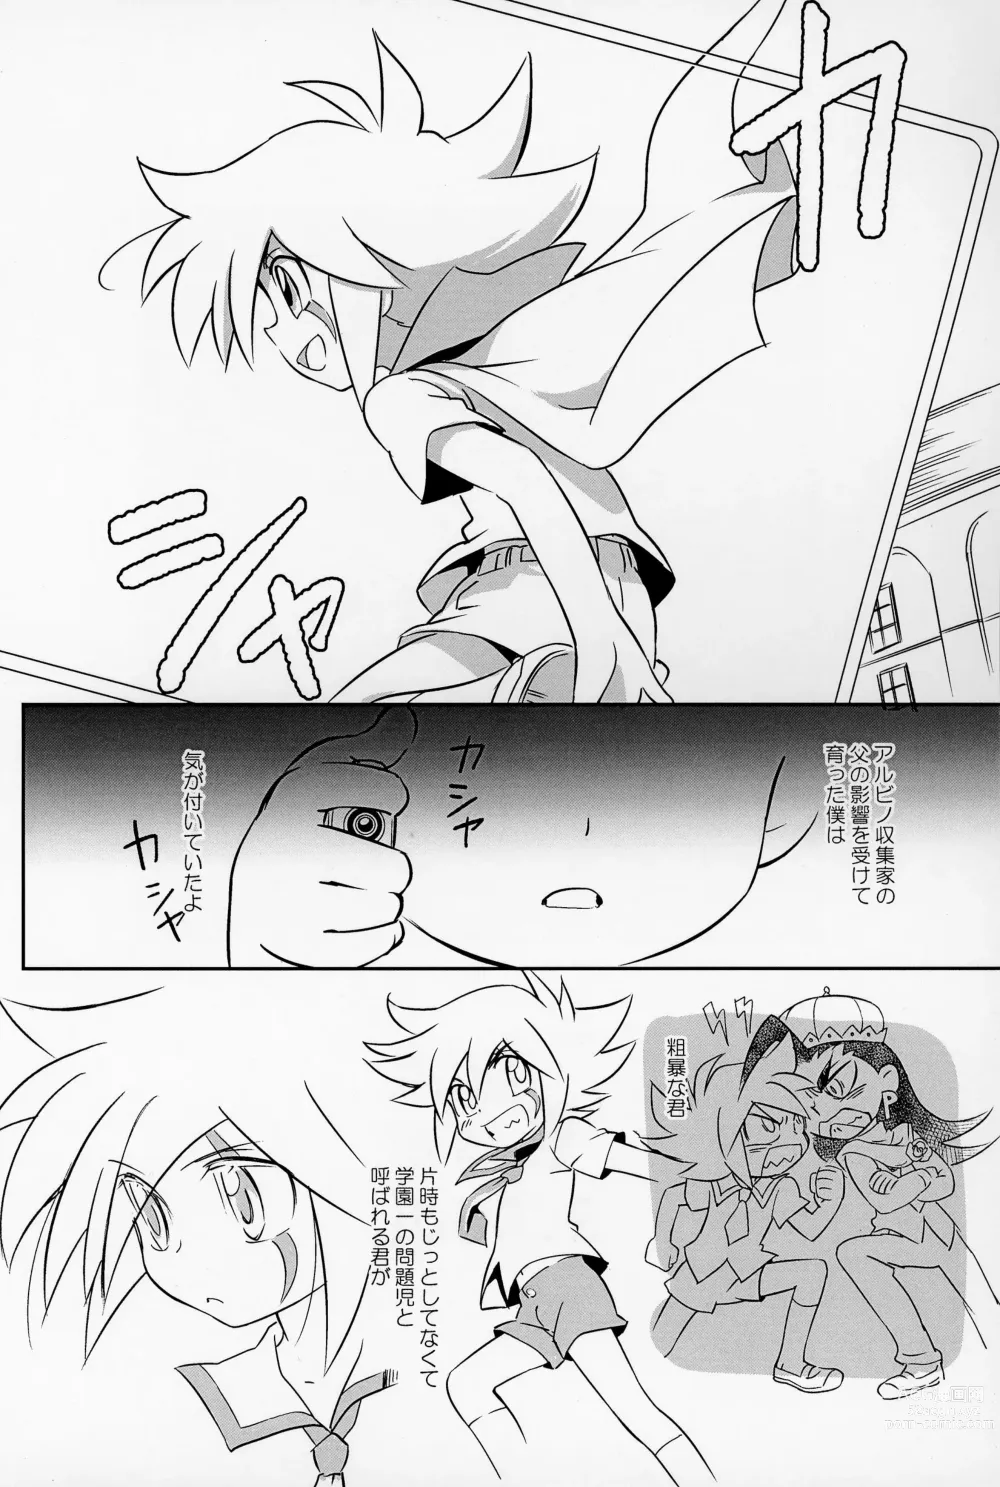 Page 3 of doujinshi Jack is at school.